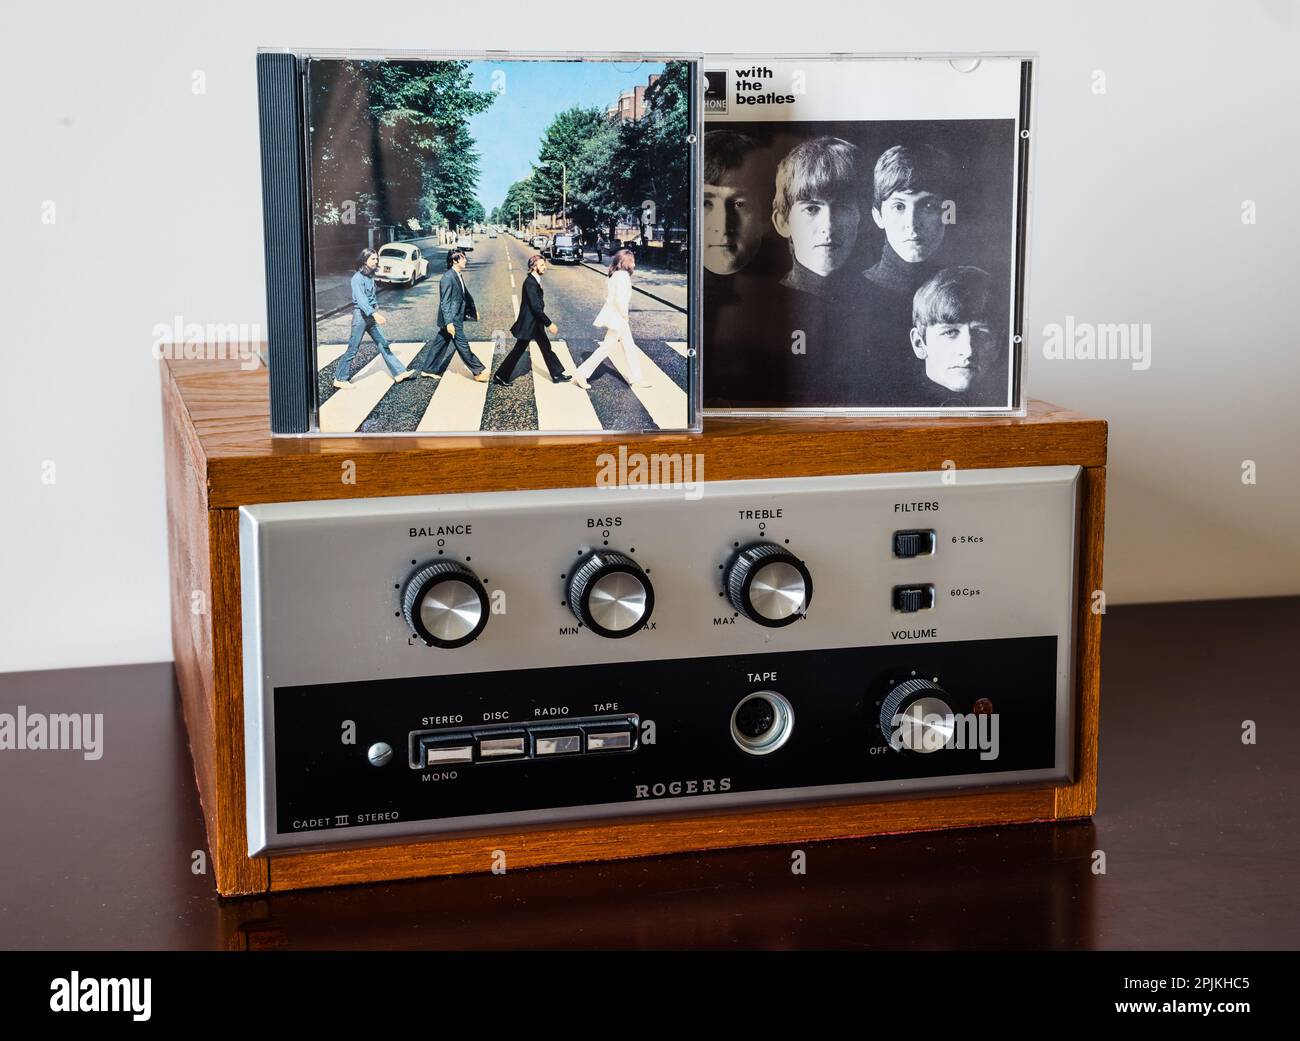 EMI CD - The Beatles - Abbey Road and With the Beatles. Stock Photo